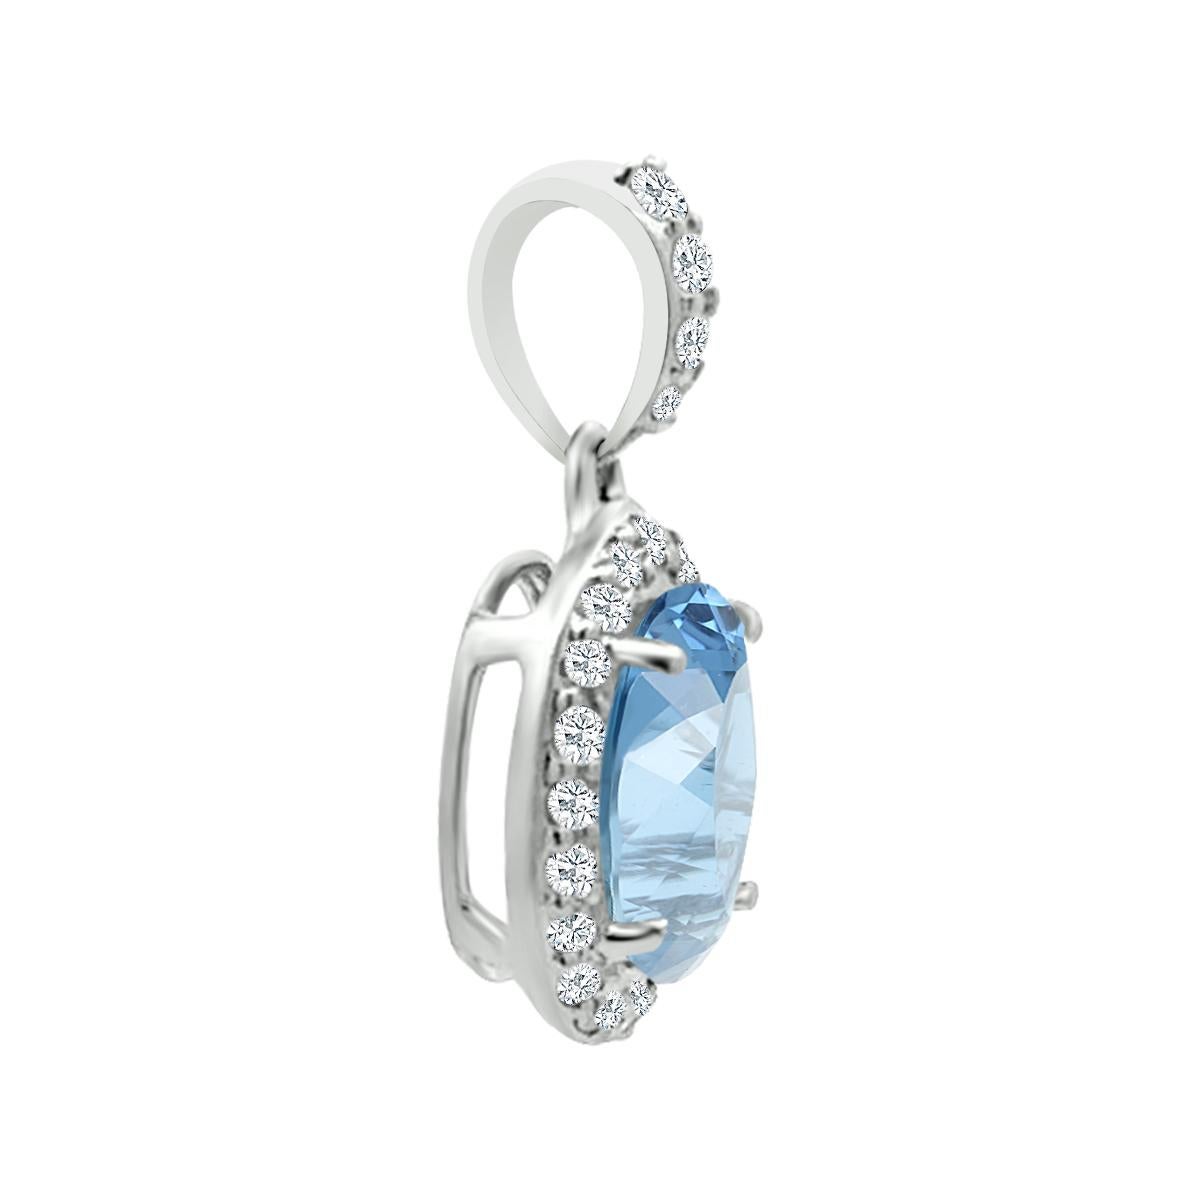 Create An Aura Of Elegance With this Lovely Oval - Cut Aquamarine And Diamond Halo Pendant. 
A Beautiful 8x6mm Oval Cut Aquamarine Is Dressed Up With A Diamond Accent In This Elegant Pendant. This Pendant Is Set In 14K White Gold.
Too Beautiful For